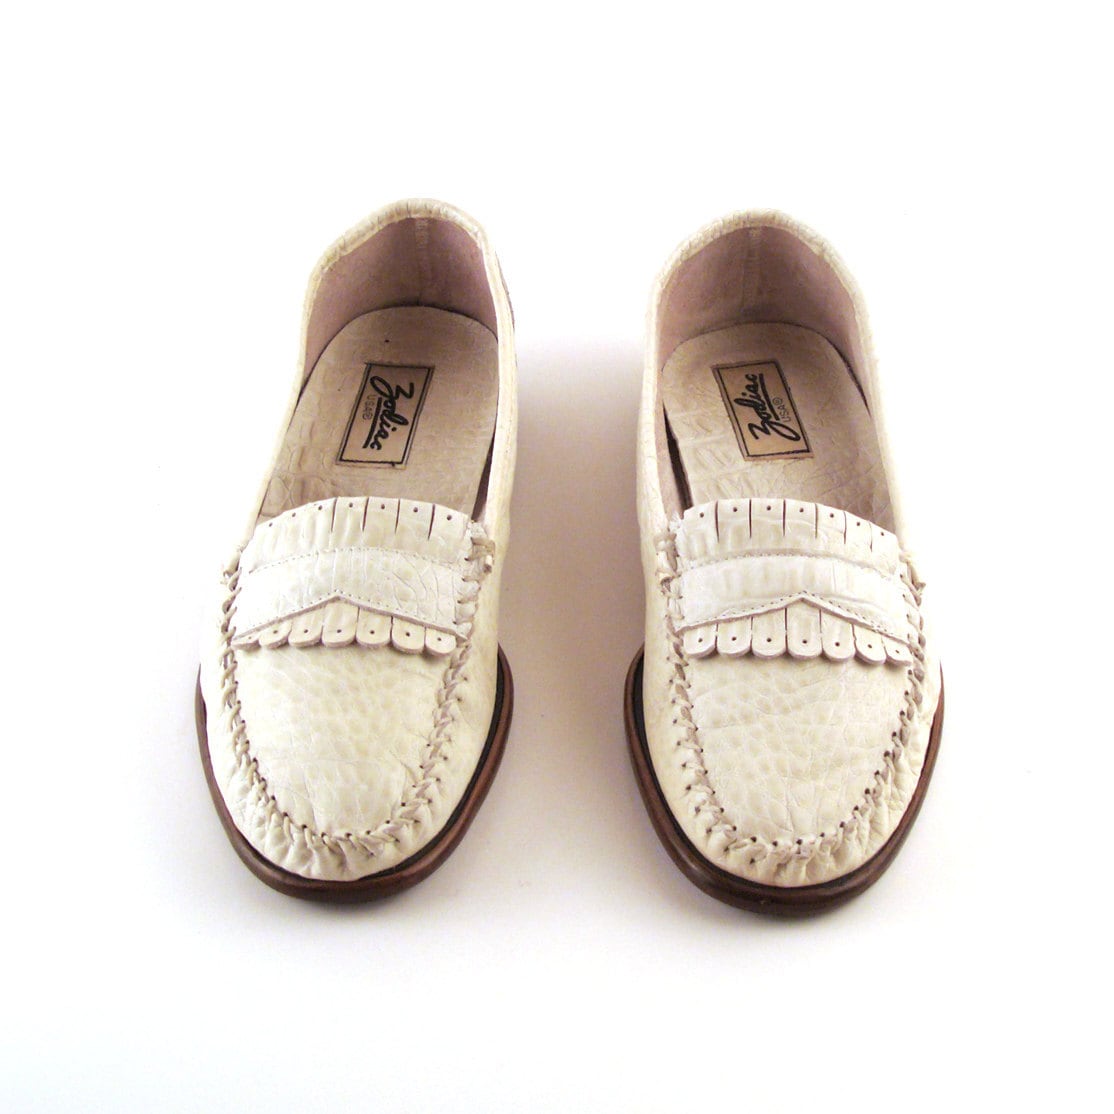 Zodiac White Loafers Vintage 1980s Mens Shoes Size 9 1/2